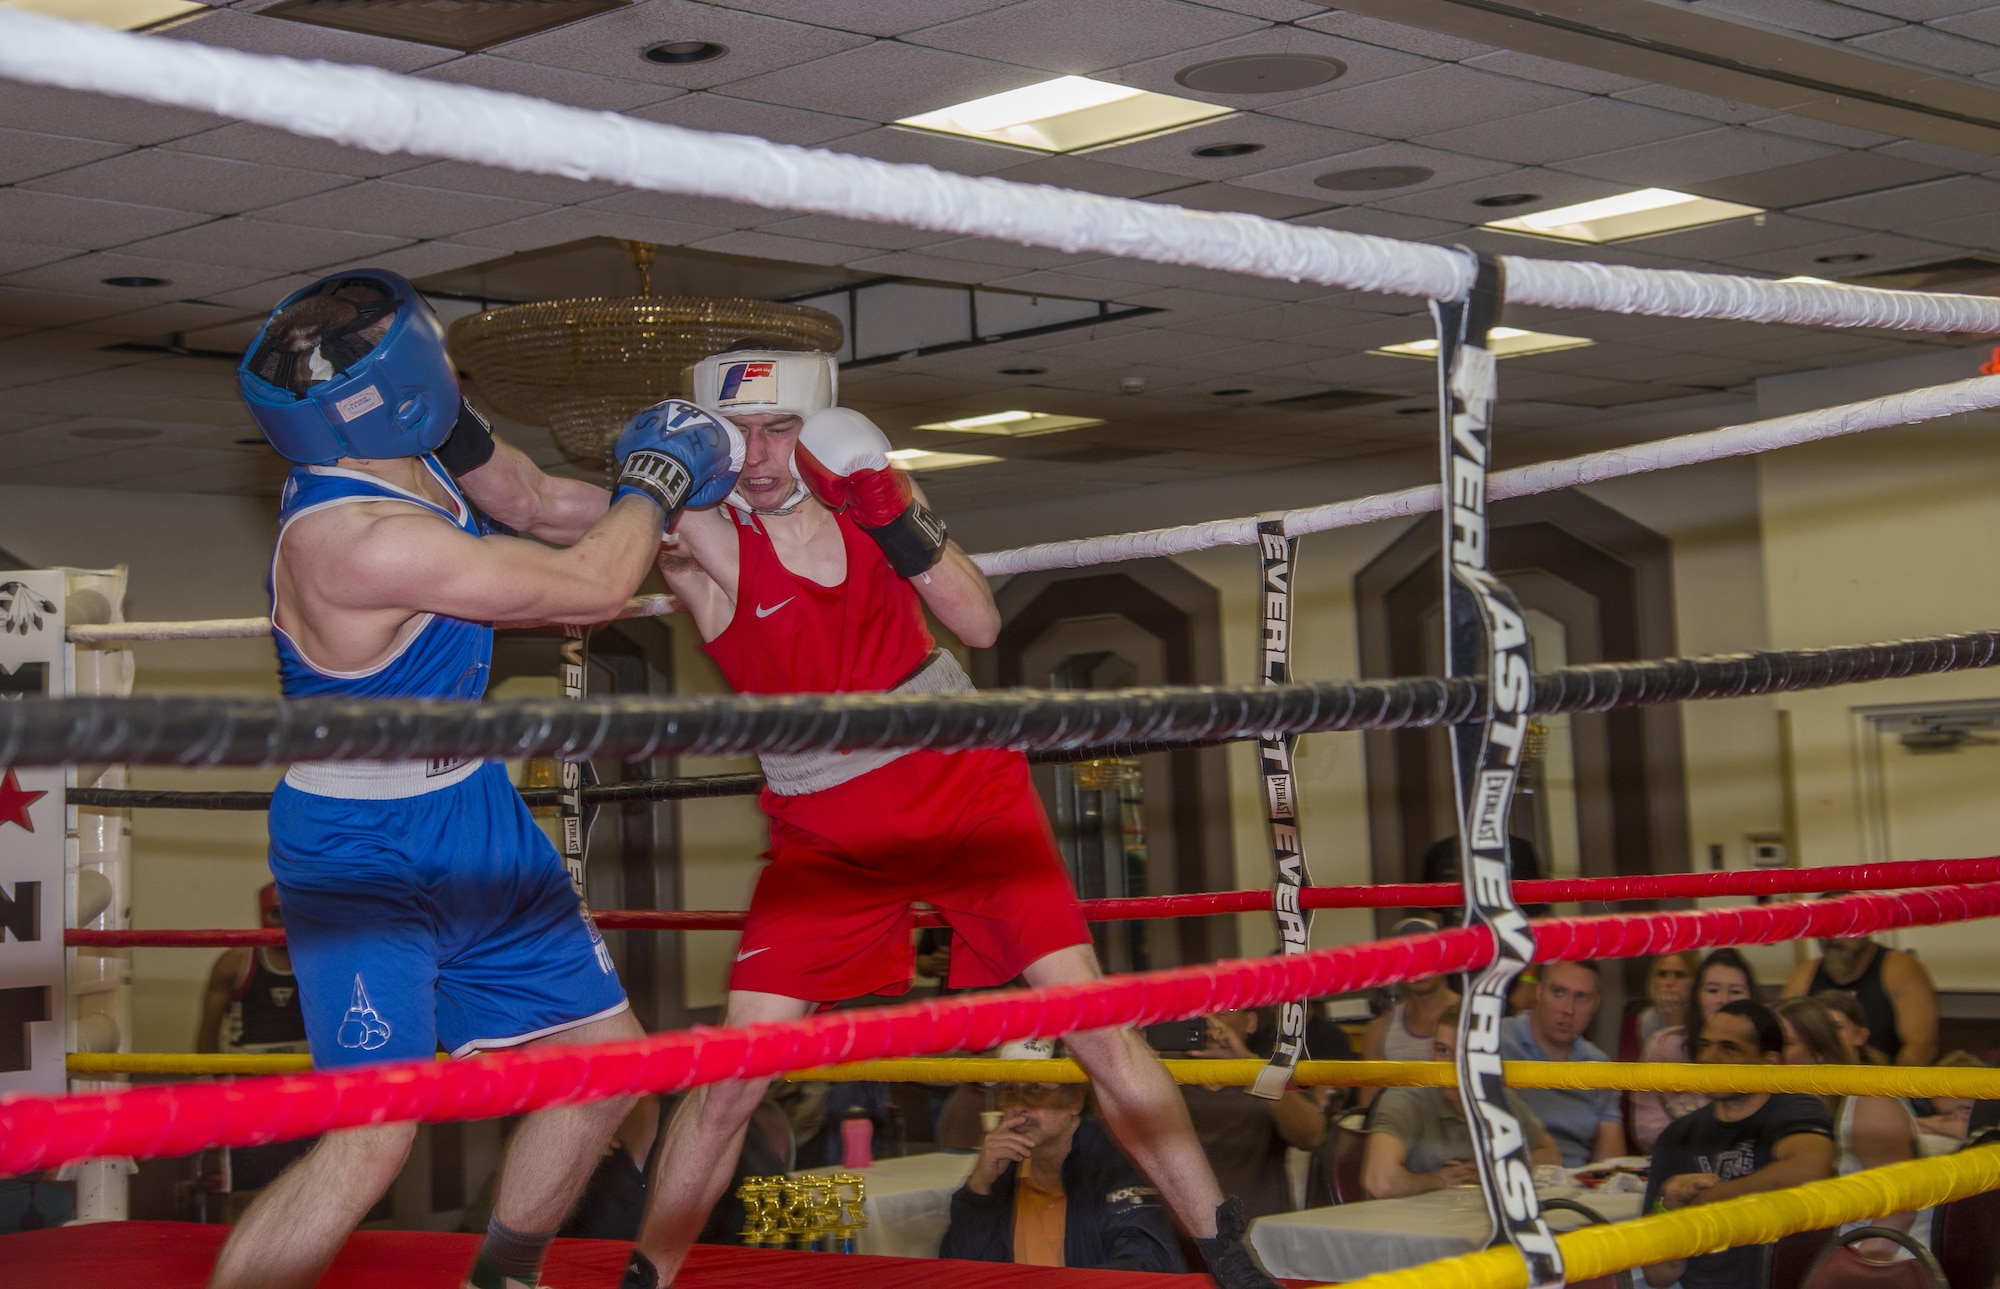 Staff Sgt. Ryan Savage, a 91st Security Forces Group evaluator, lands a punch on his opponent during a match in Minot, N.D., May 7, 2016. Savage is a current state and regional champion and will compete for national champion in the 152-pound weight class. (U.S. Air Force photo/Airman 1st Class Christian Sullivan)